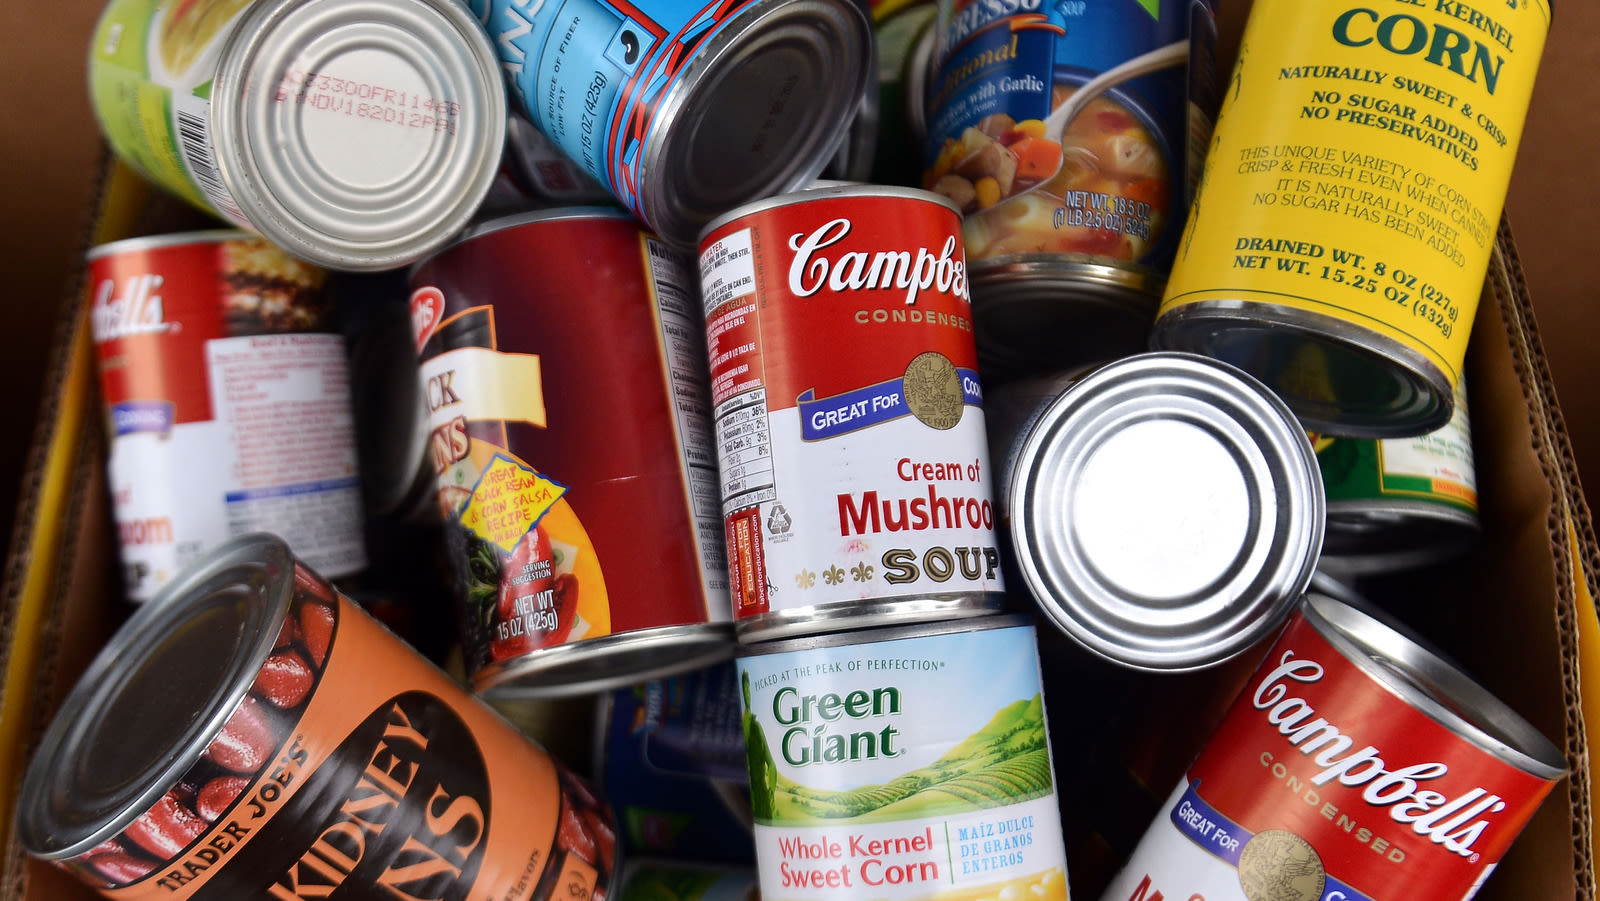 13 Of The Most Popular Canned Foods In The US